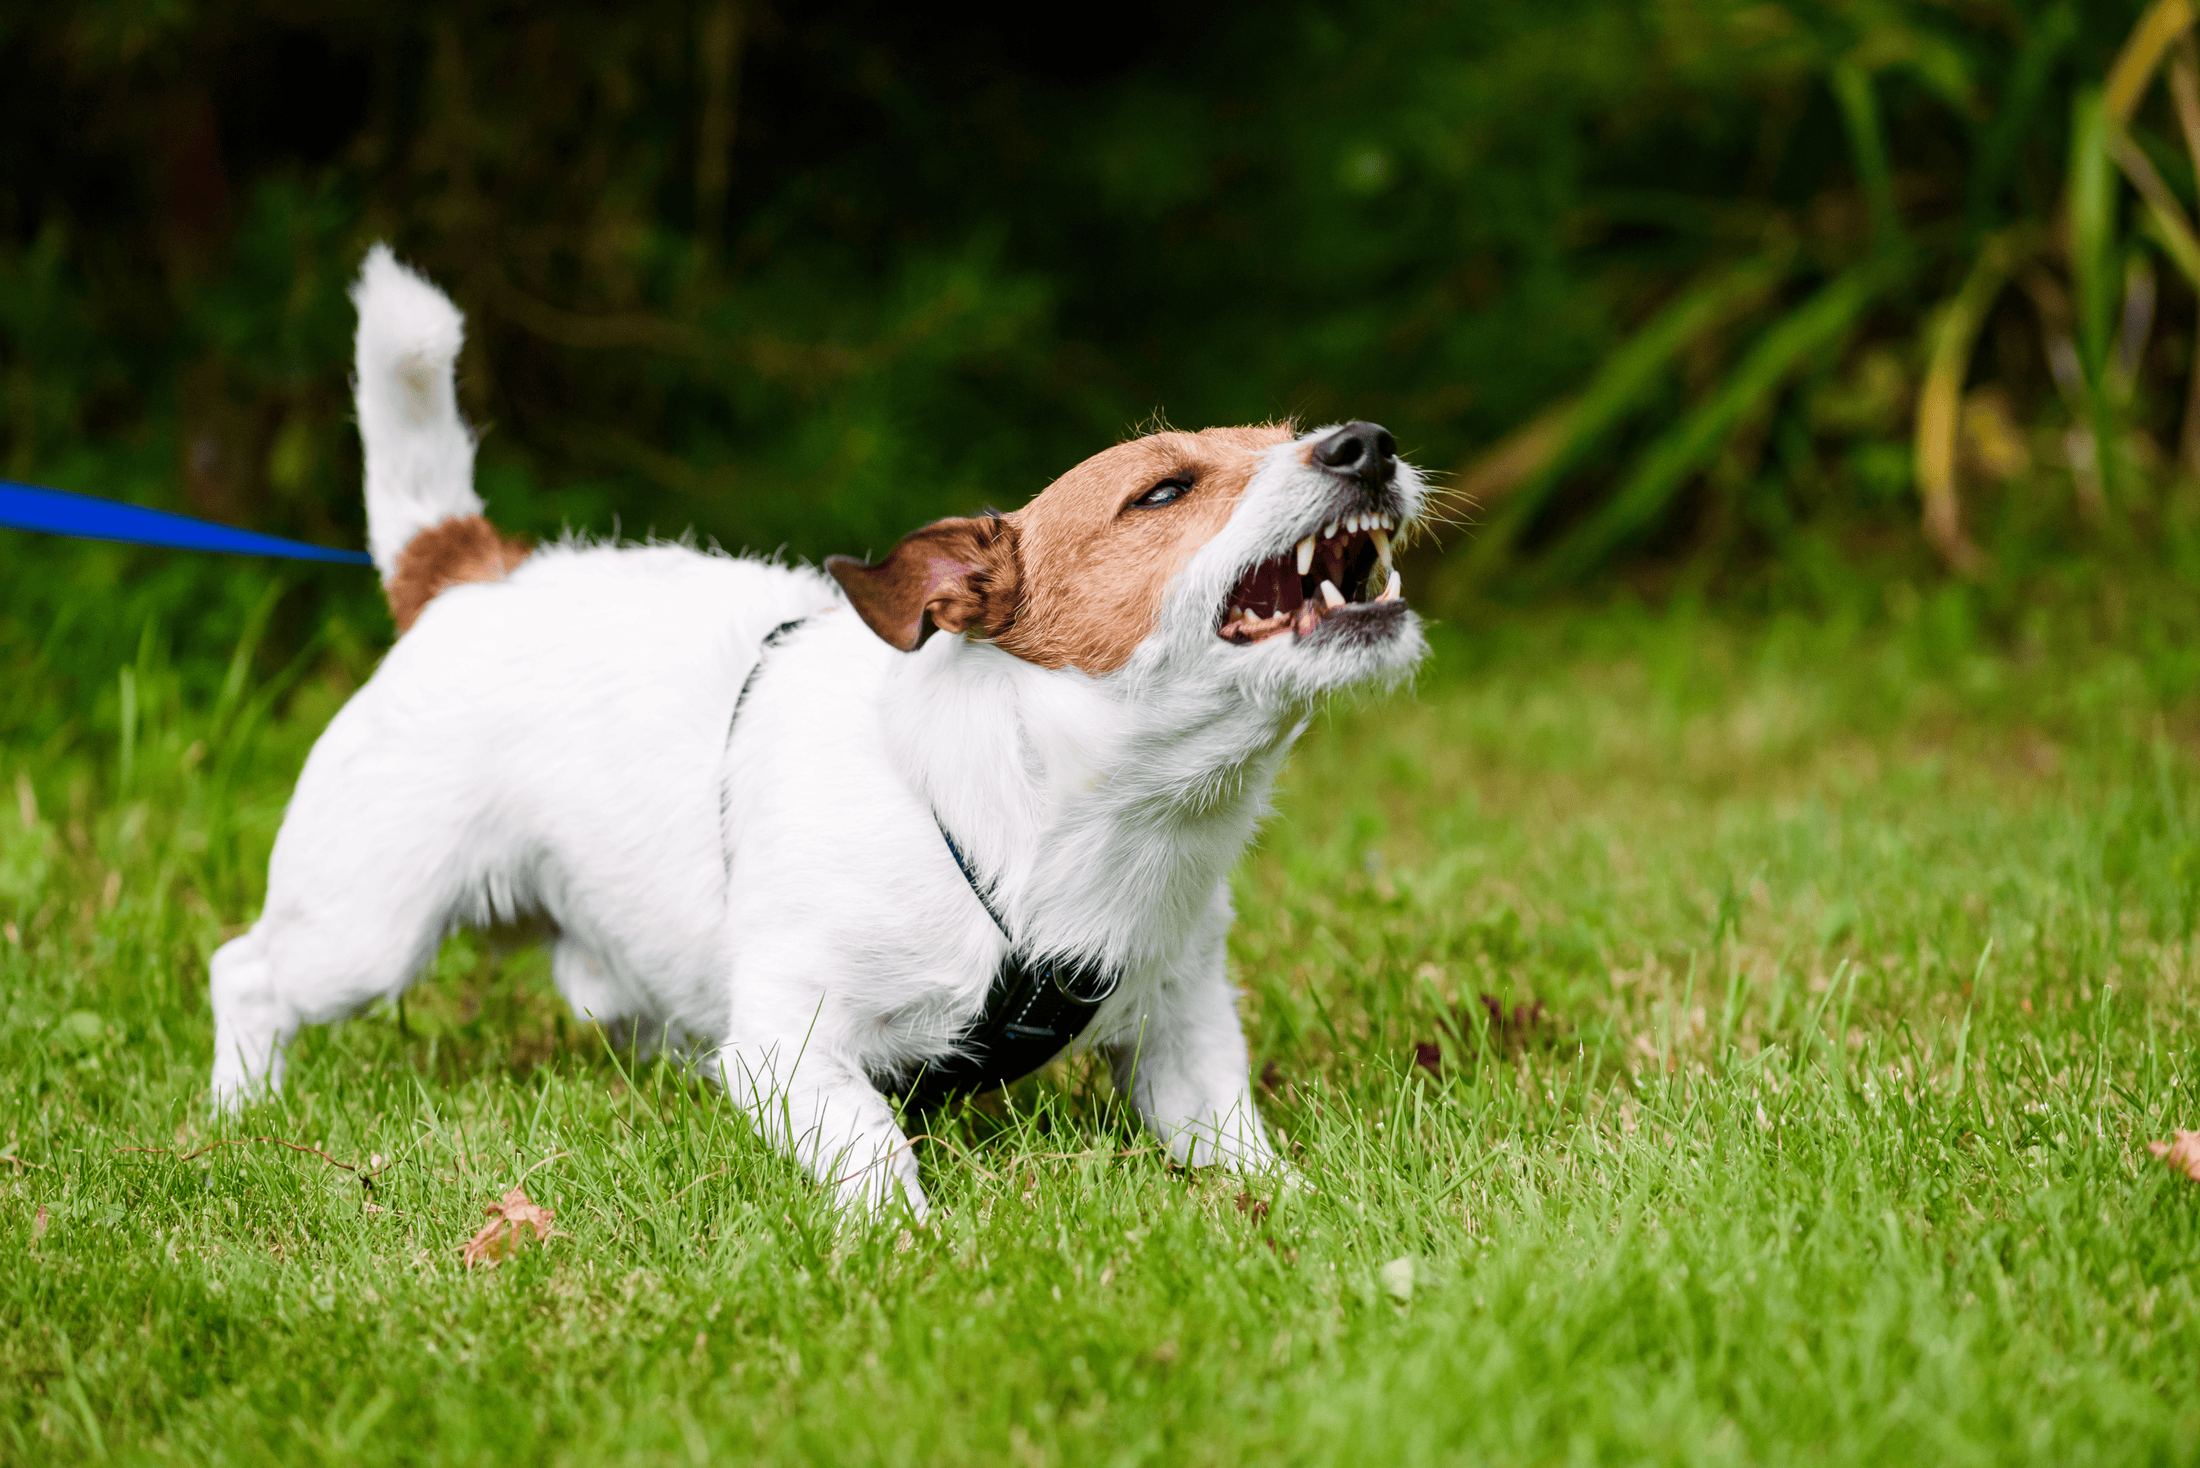 Aggressive dog body language is usually a response to fear. Look for raised hackles, a high wagging tail, and bared teeth.